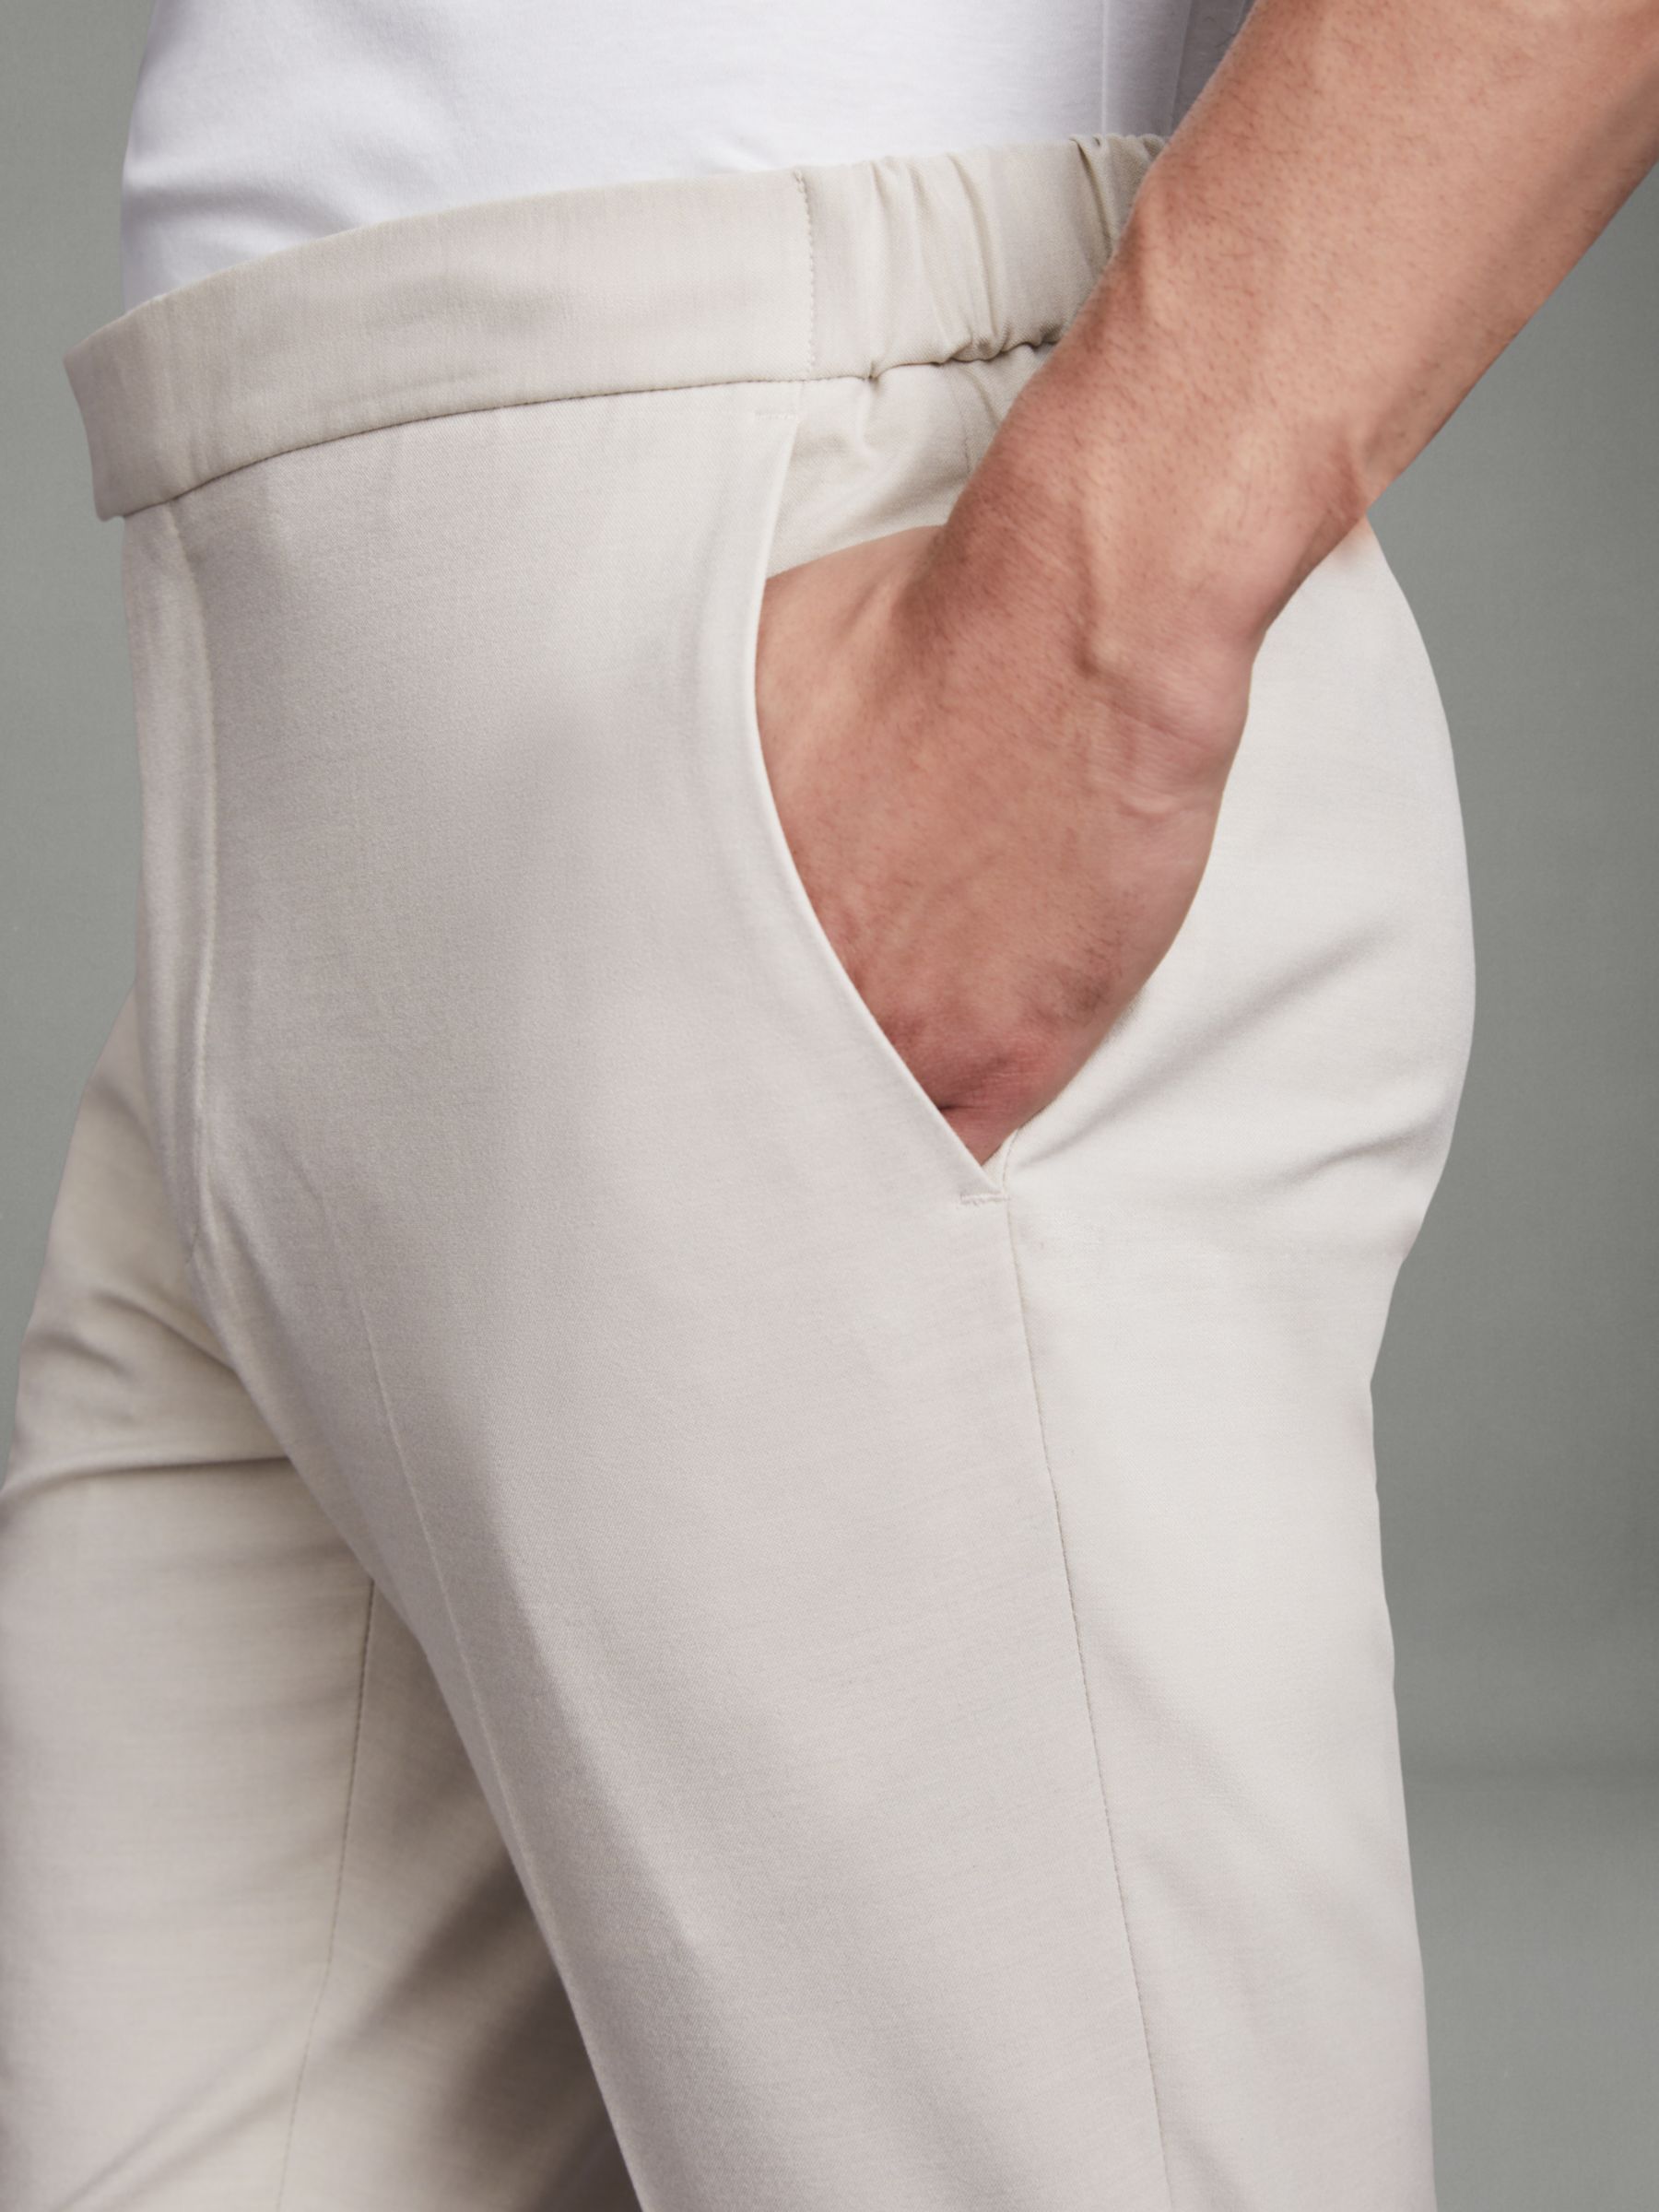 Buy Reiss Found Draw Cord Waist Slim Fit Trousers, Stone Online at johnlewis.com